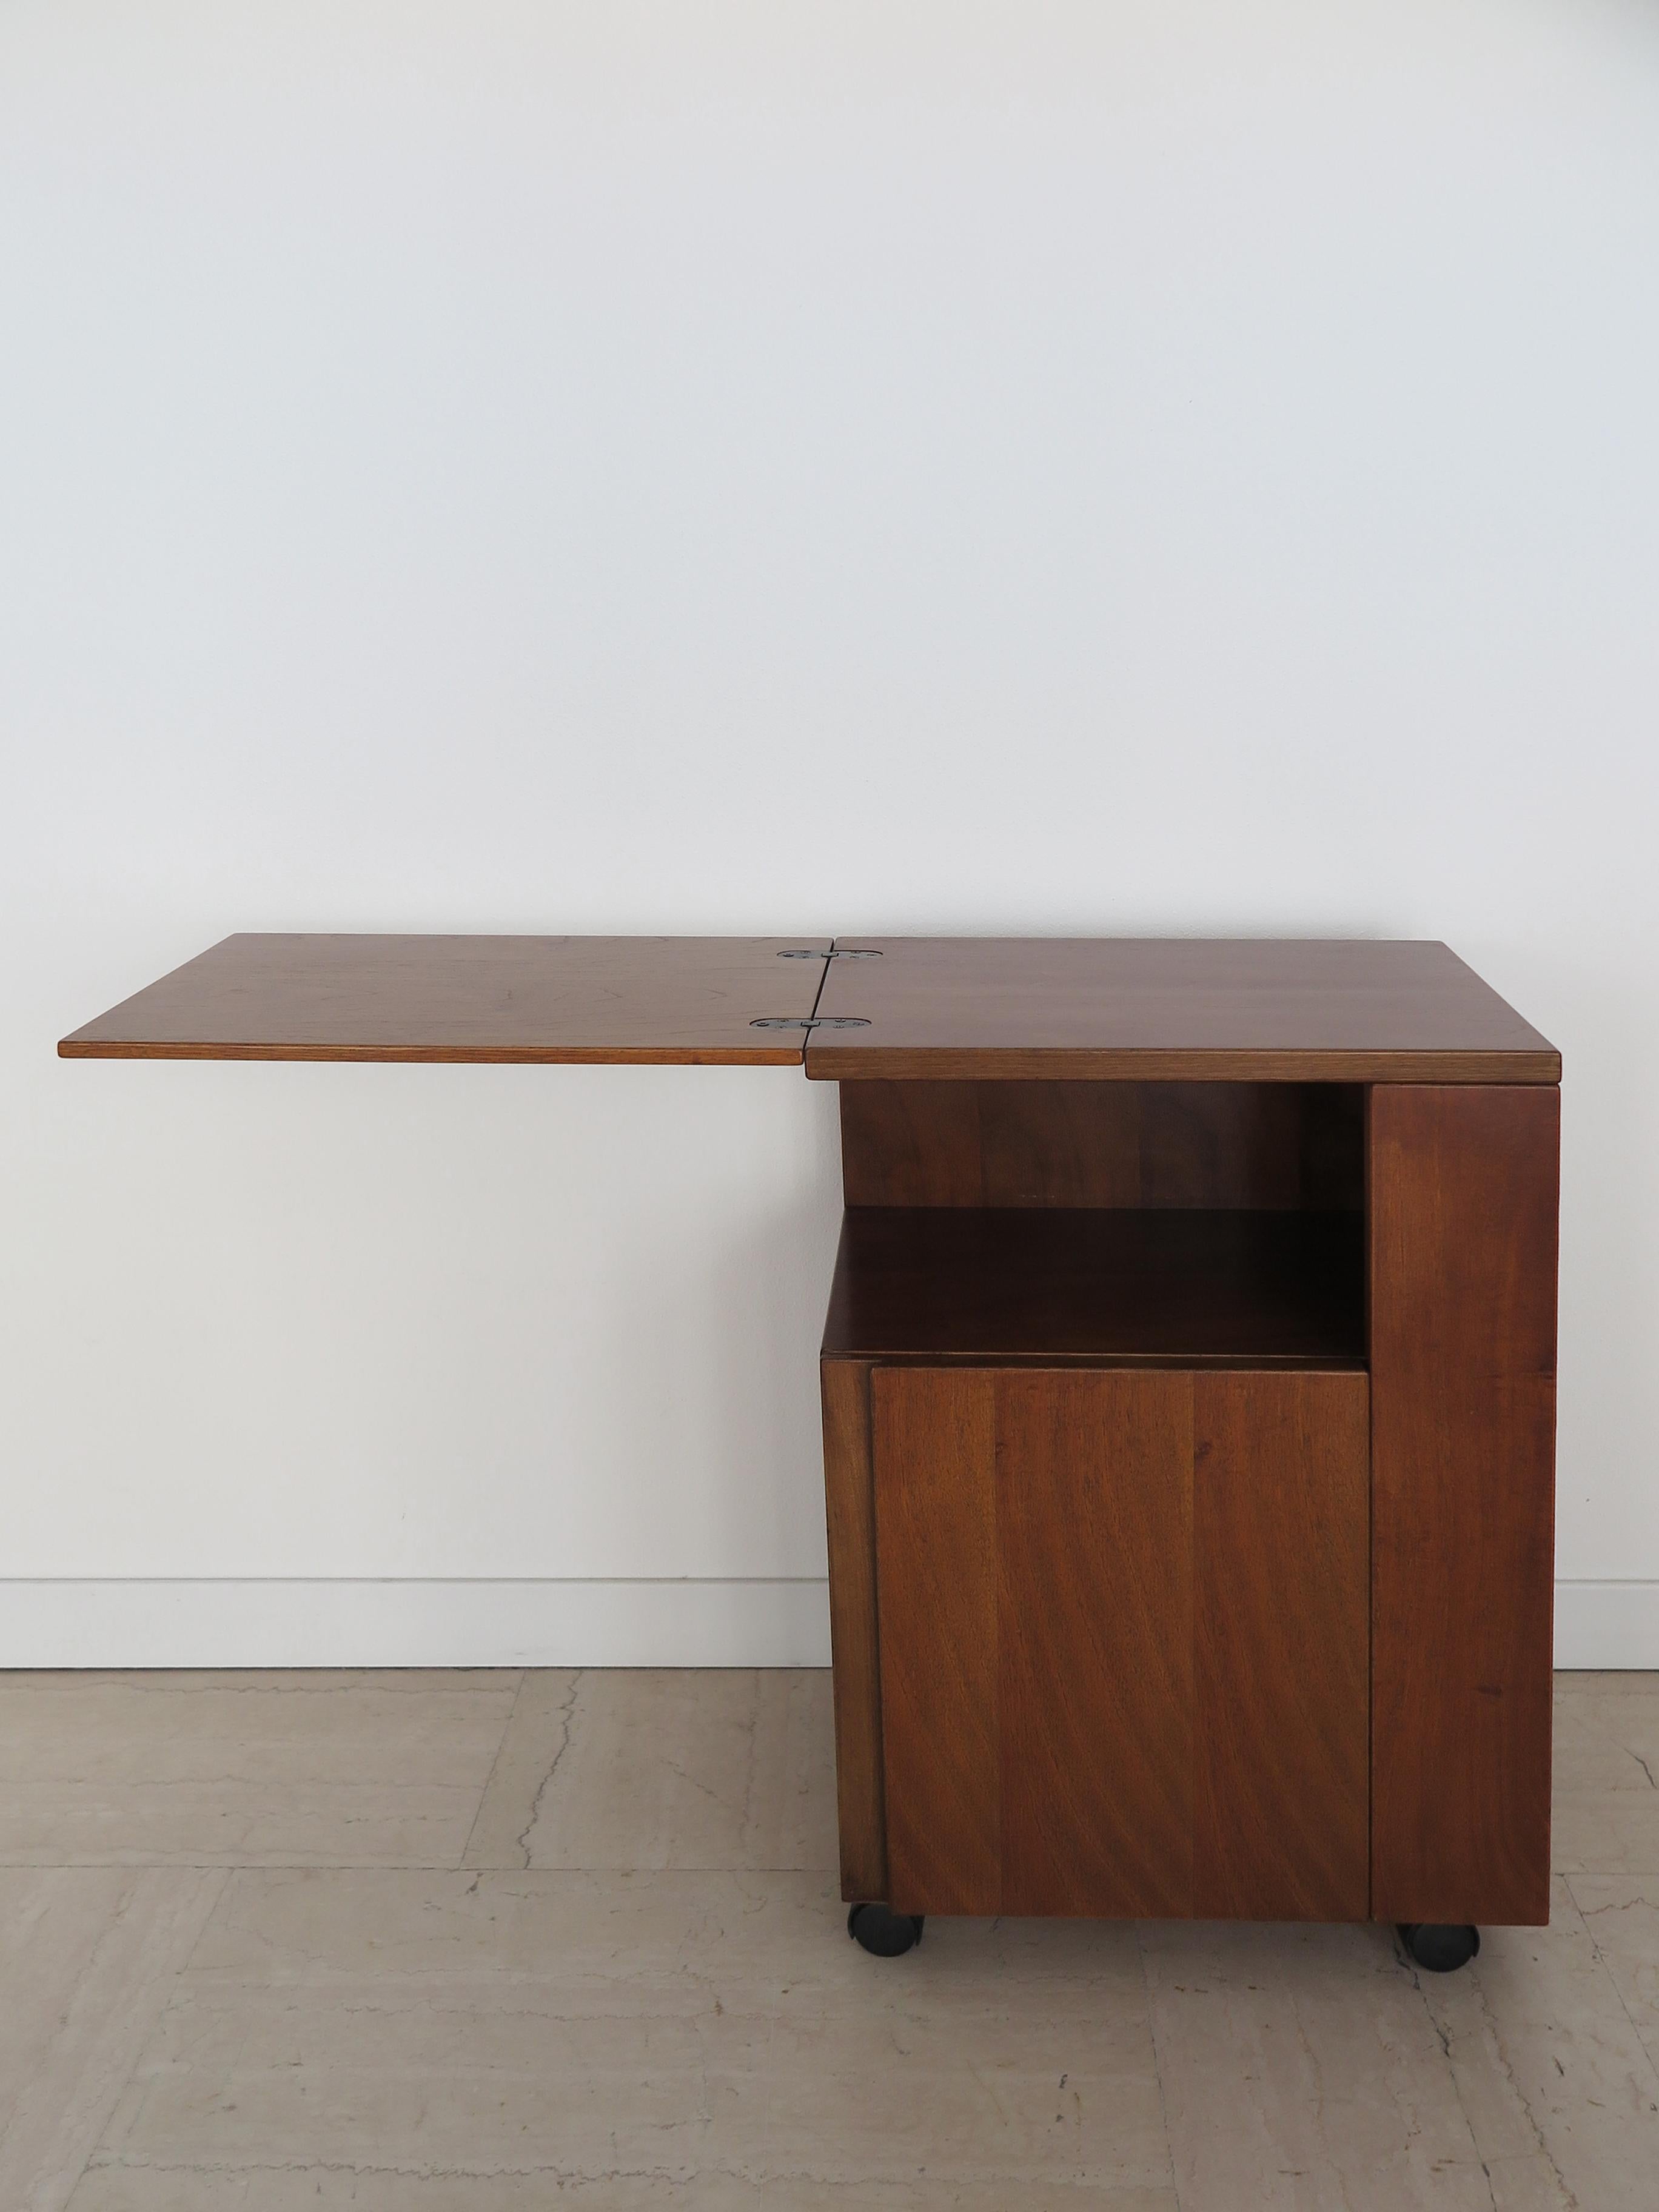 Giovanni Michelucci Poltronova Italian Wood Bedside Tables Nithg Stands 1960s For Sale 4